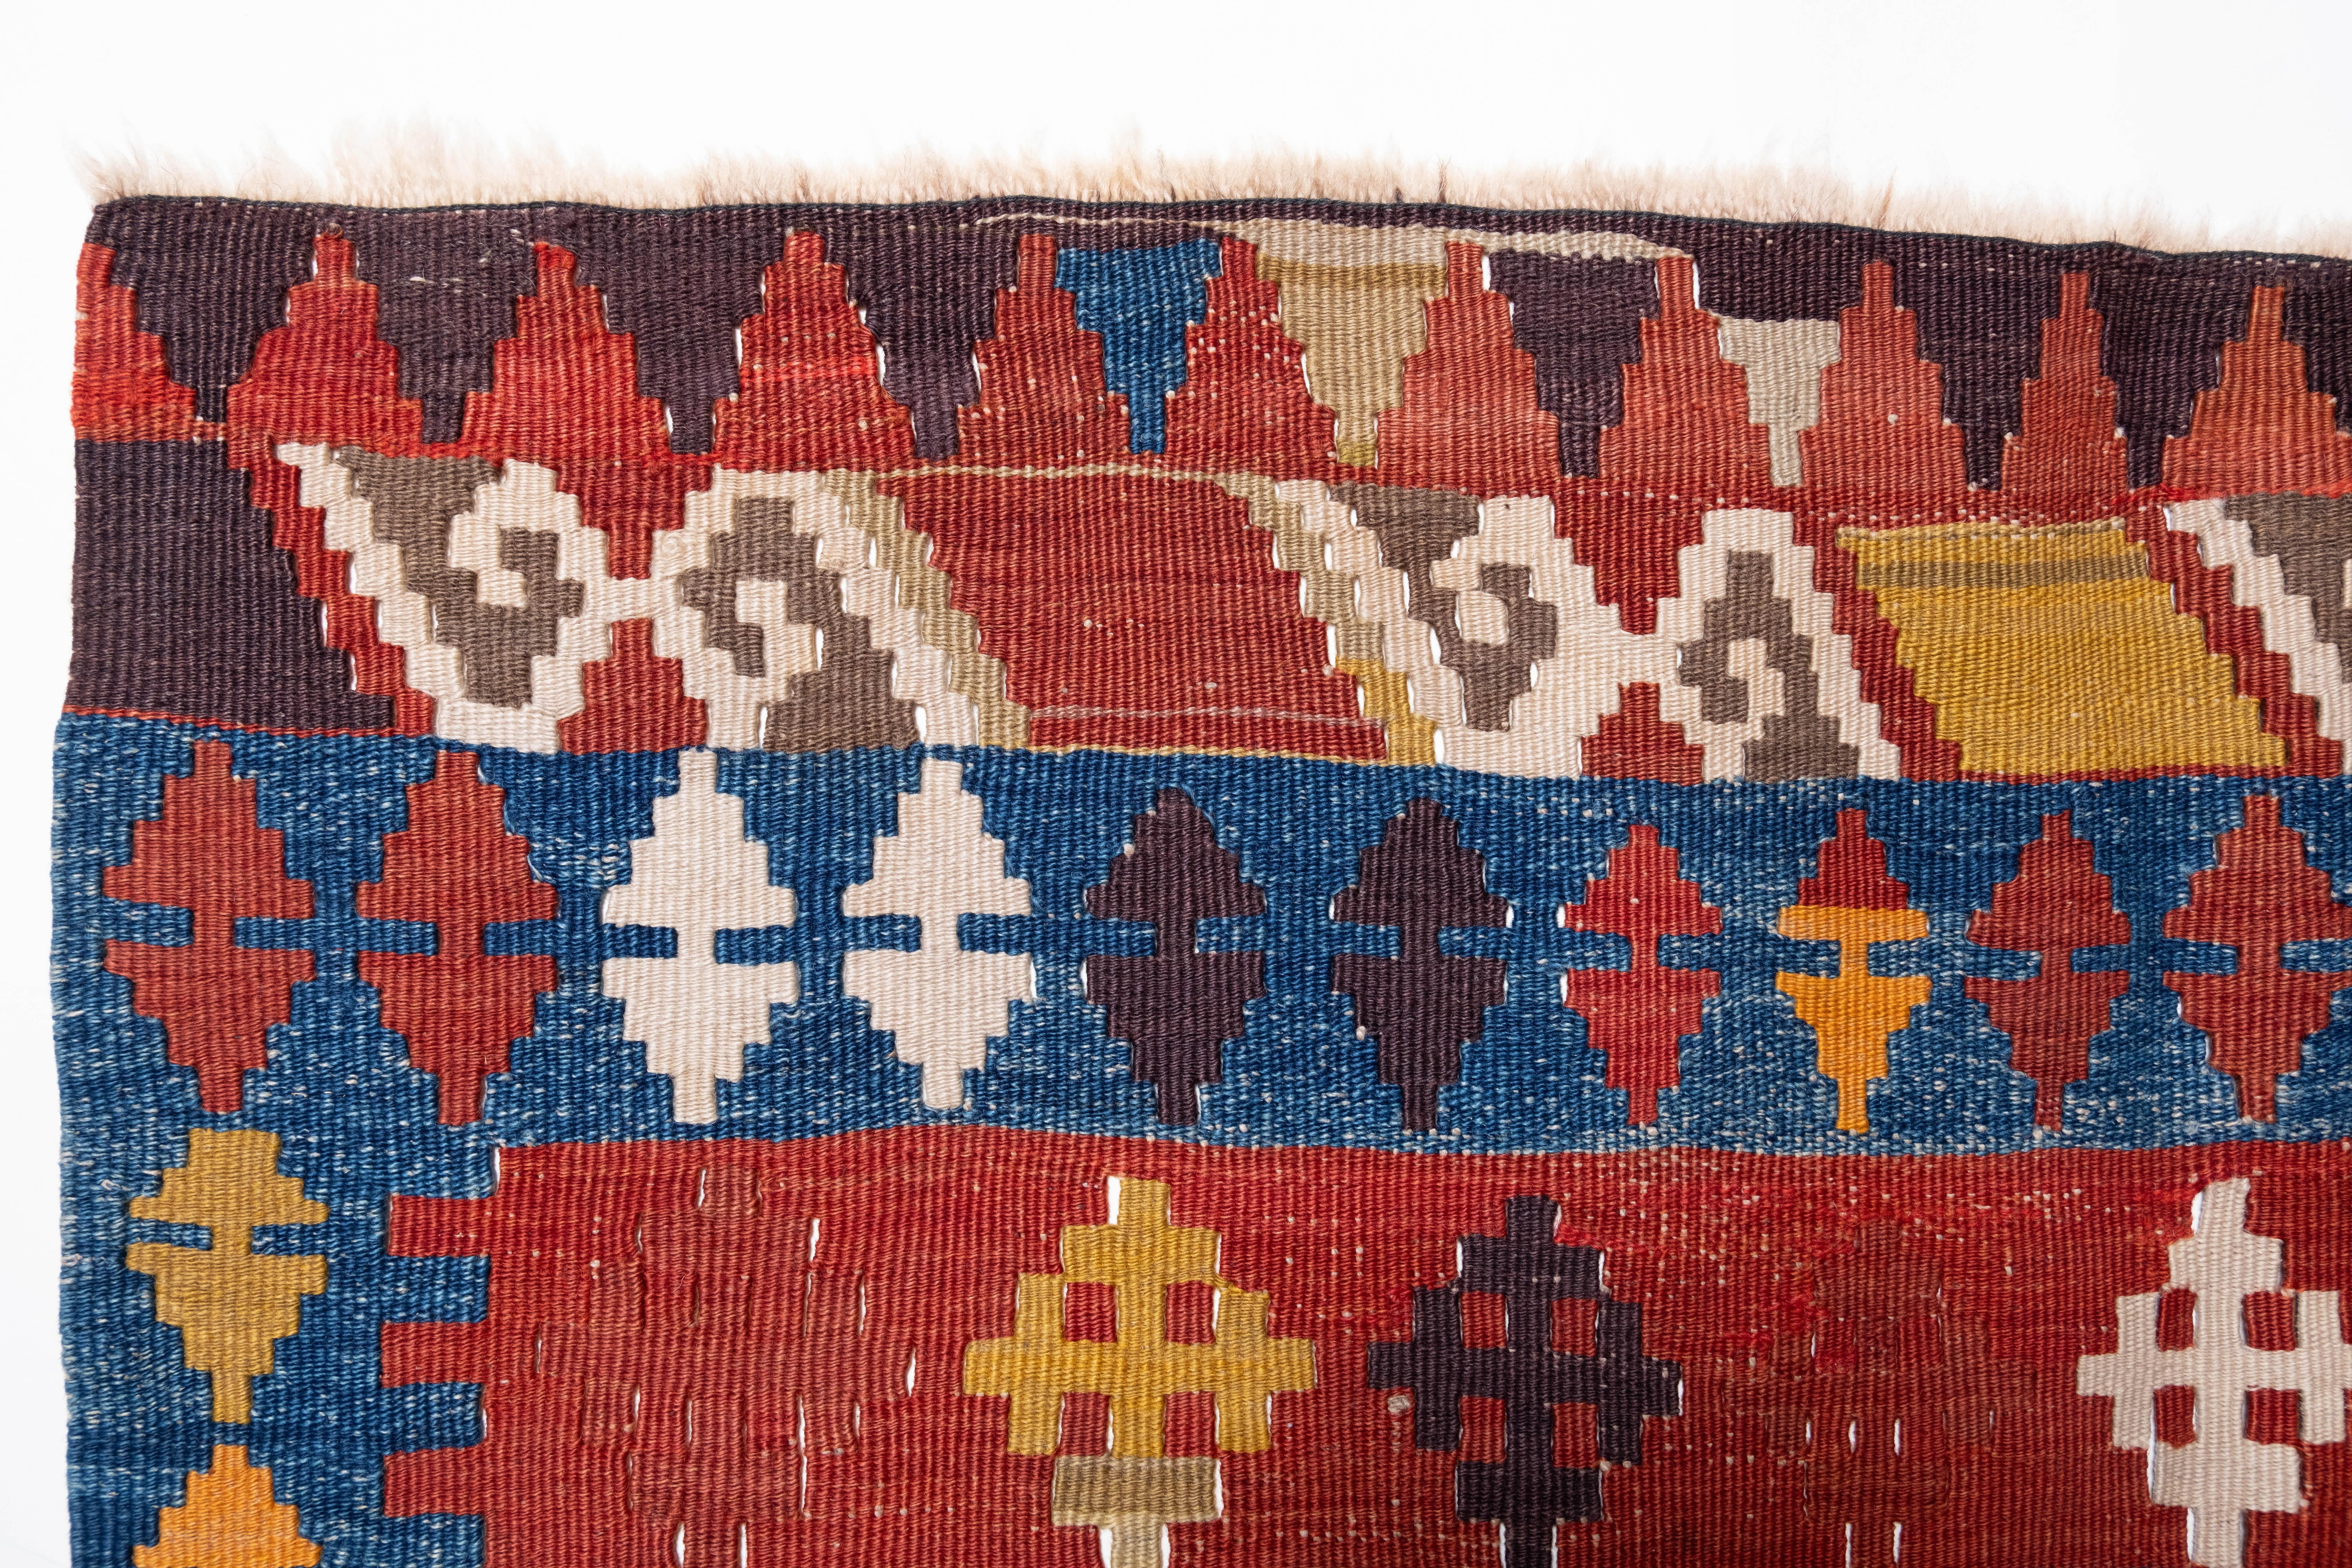 This is Central Anatolian Antique Mihrab Kilim with a rare and beautiful color composition.

This highly collectible antique kilim has wonderful special colors and textures that are typical of an old kilim in good condition. It is a piece that